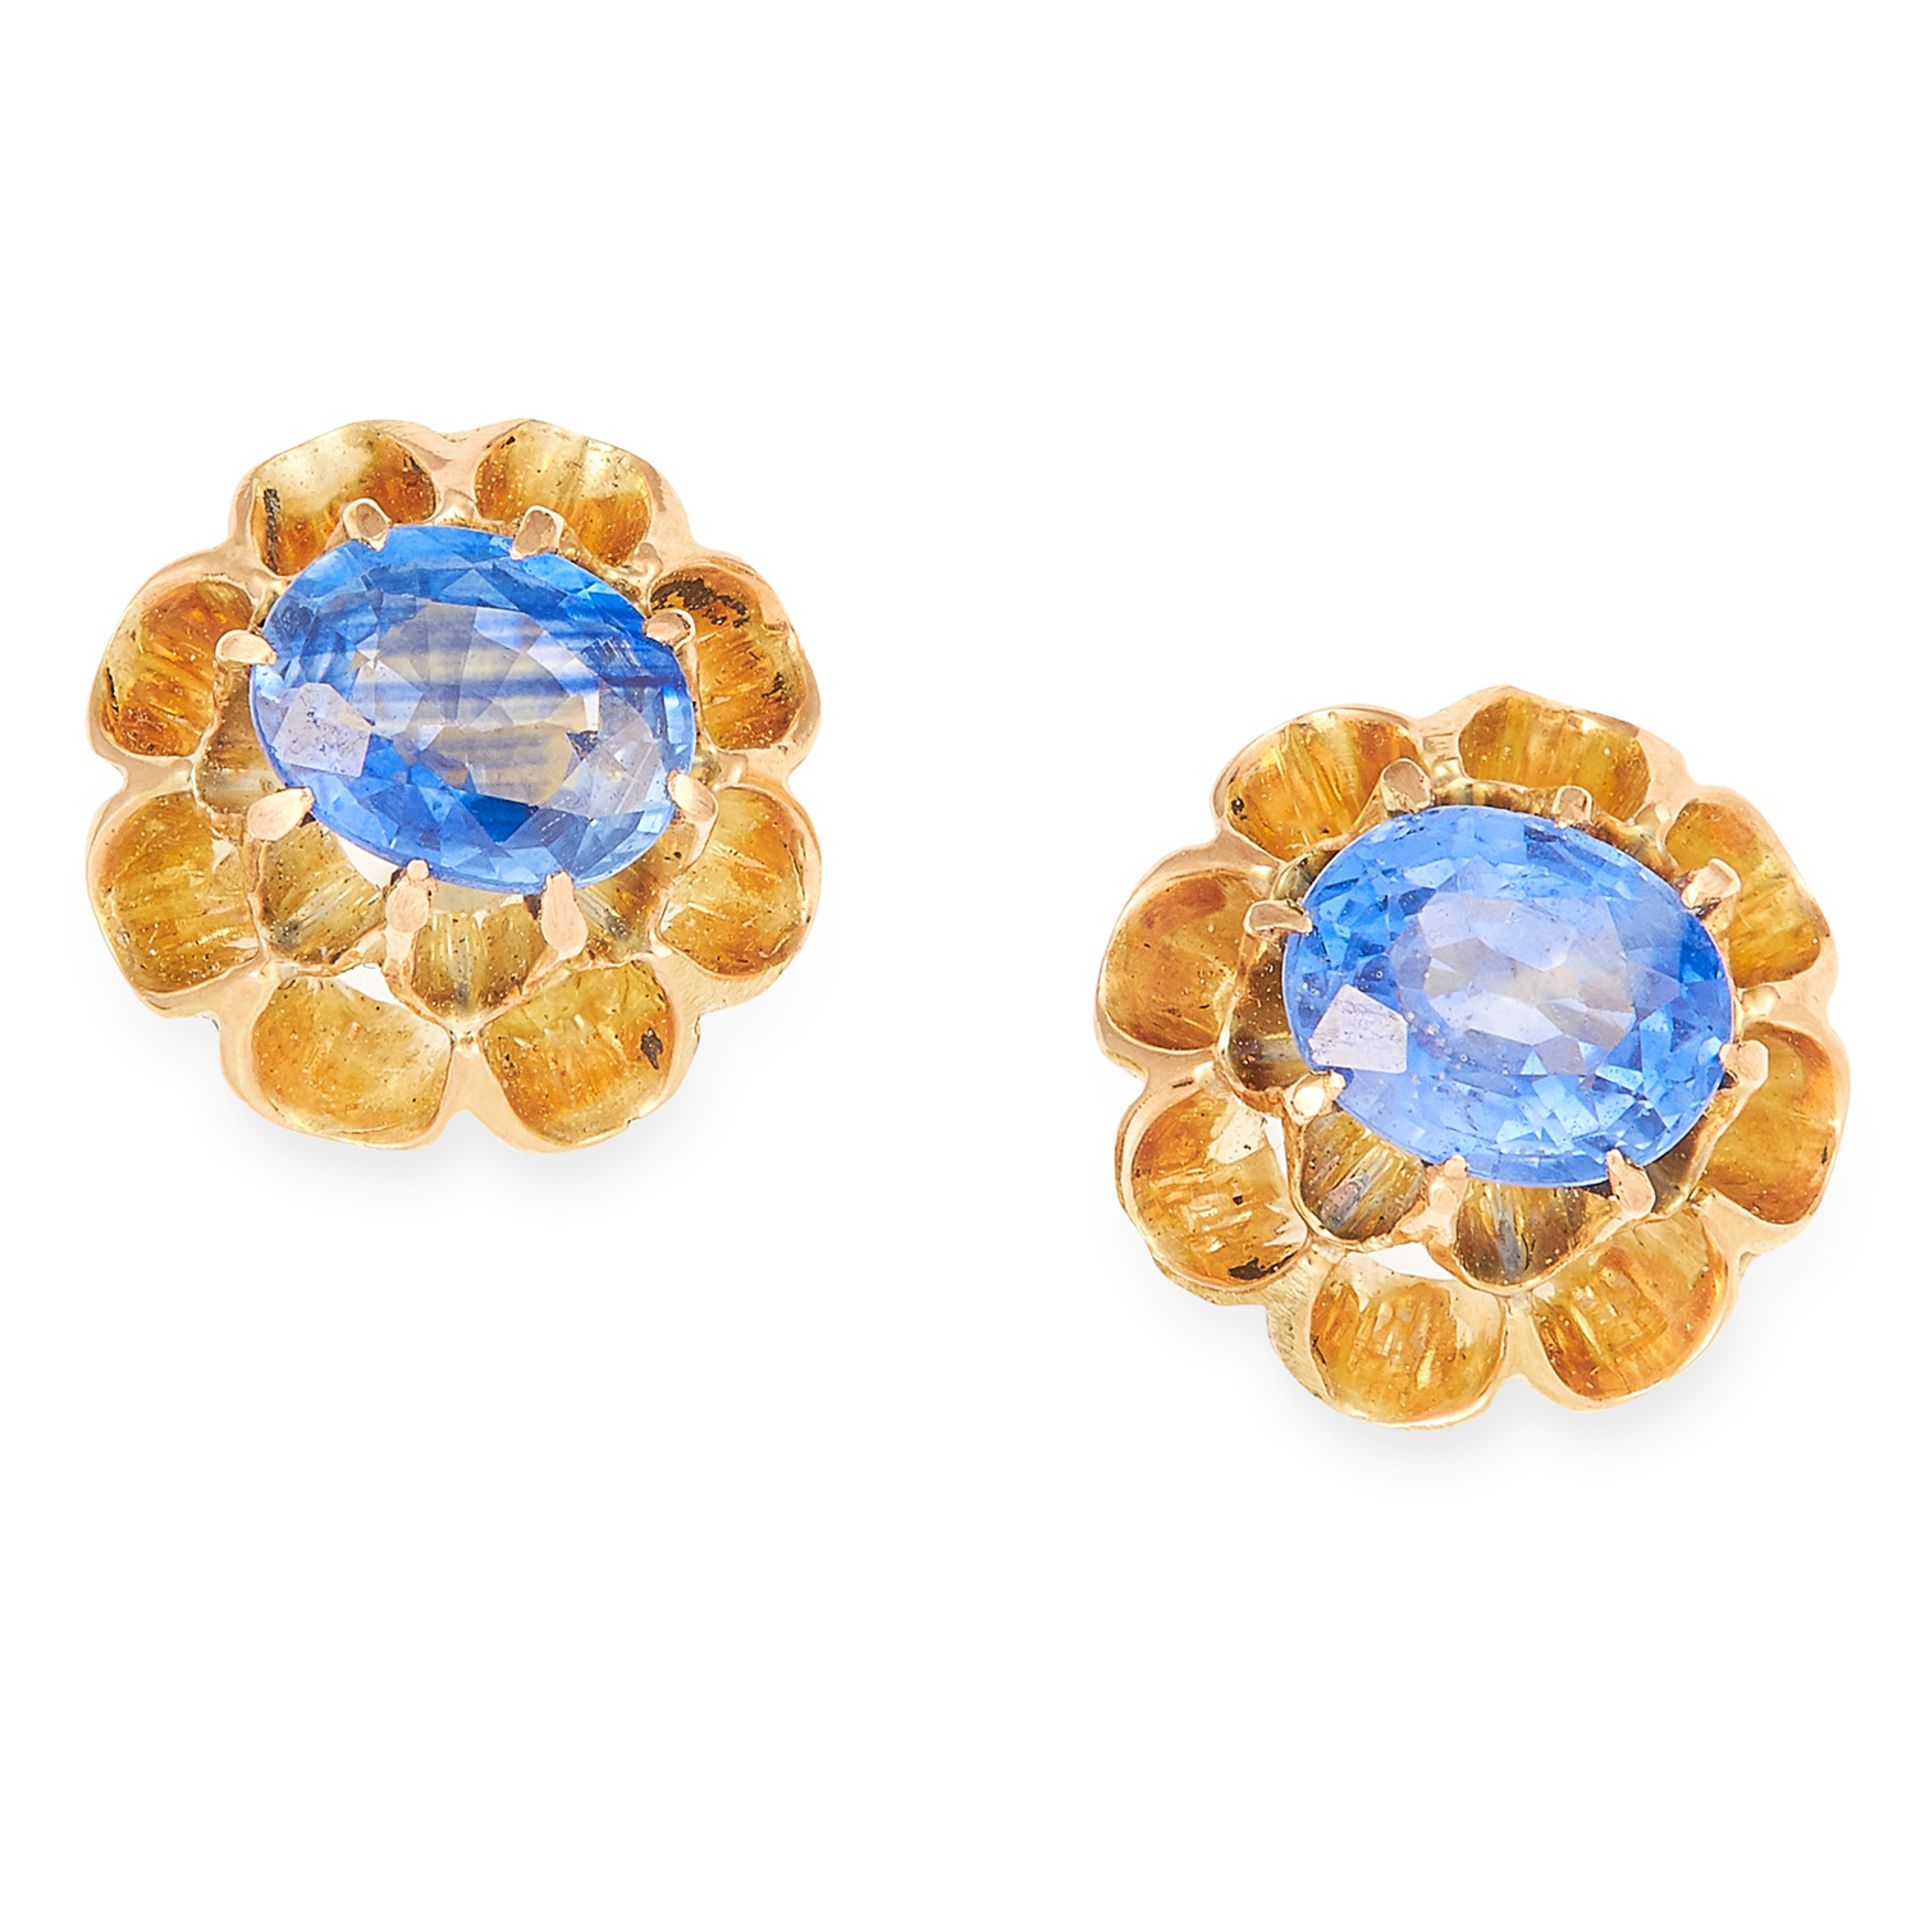 1.06 CARAT SAPPHIRE EARRINGS in yellow gold, each set with an oval cut sapphire totalling